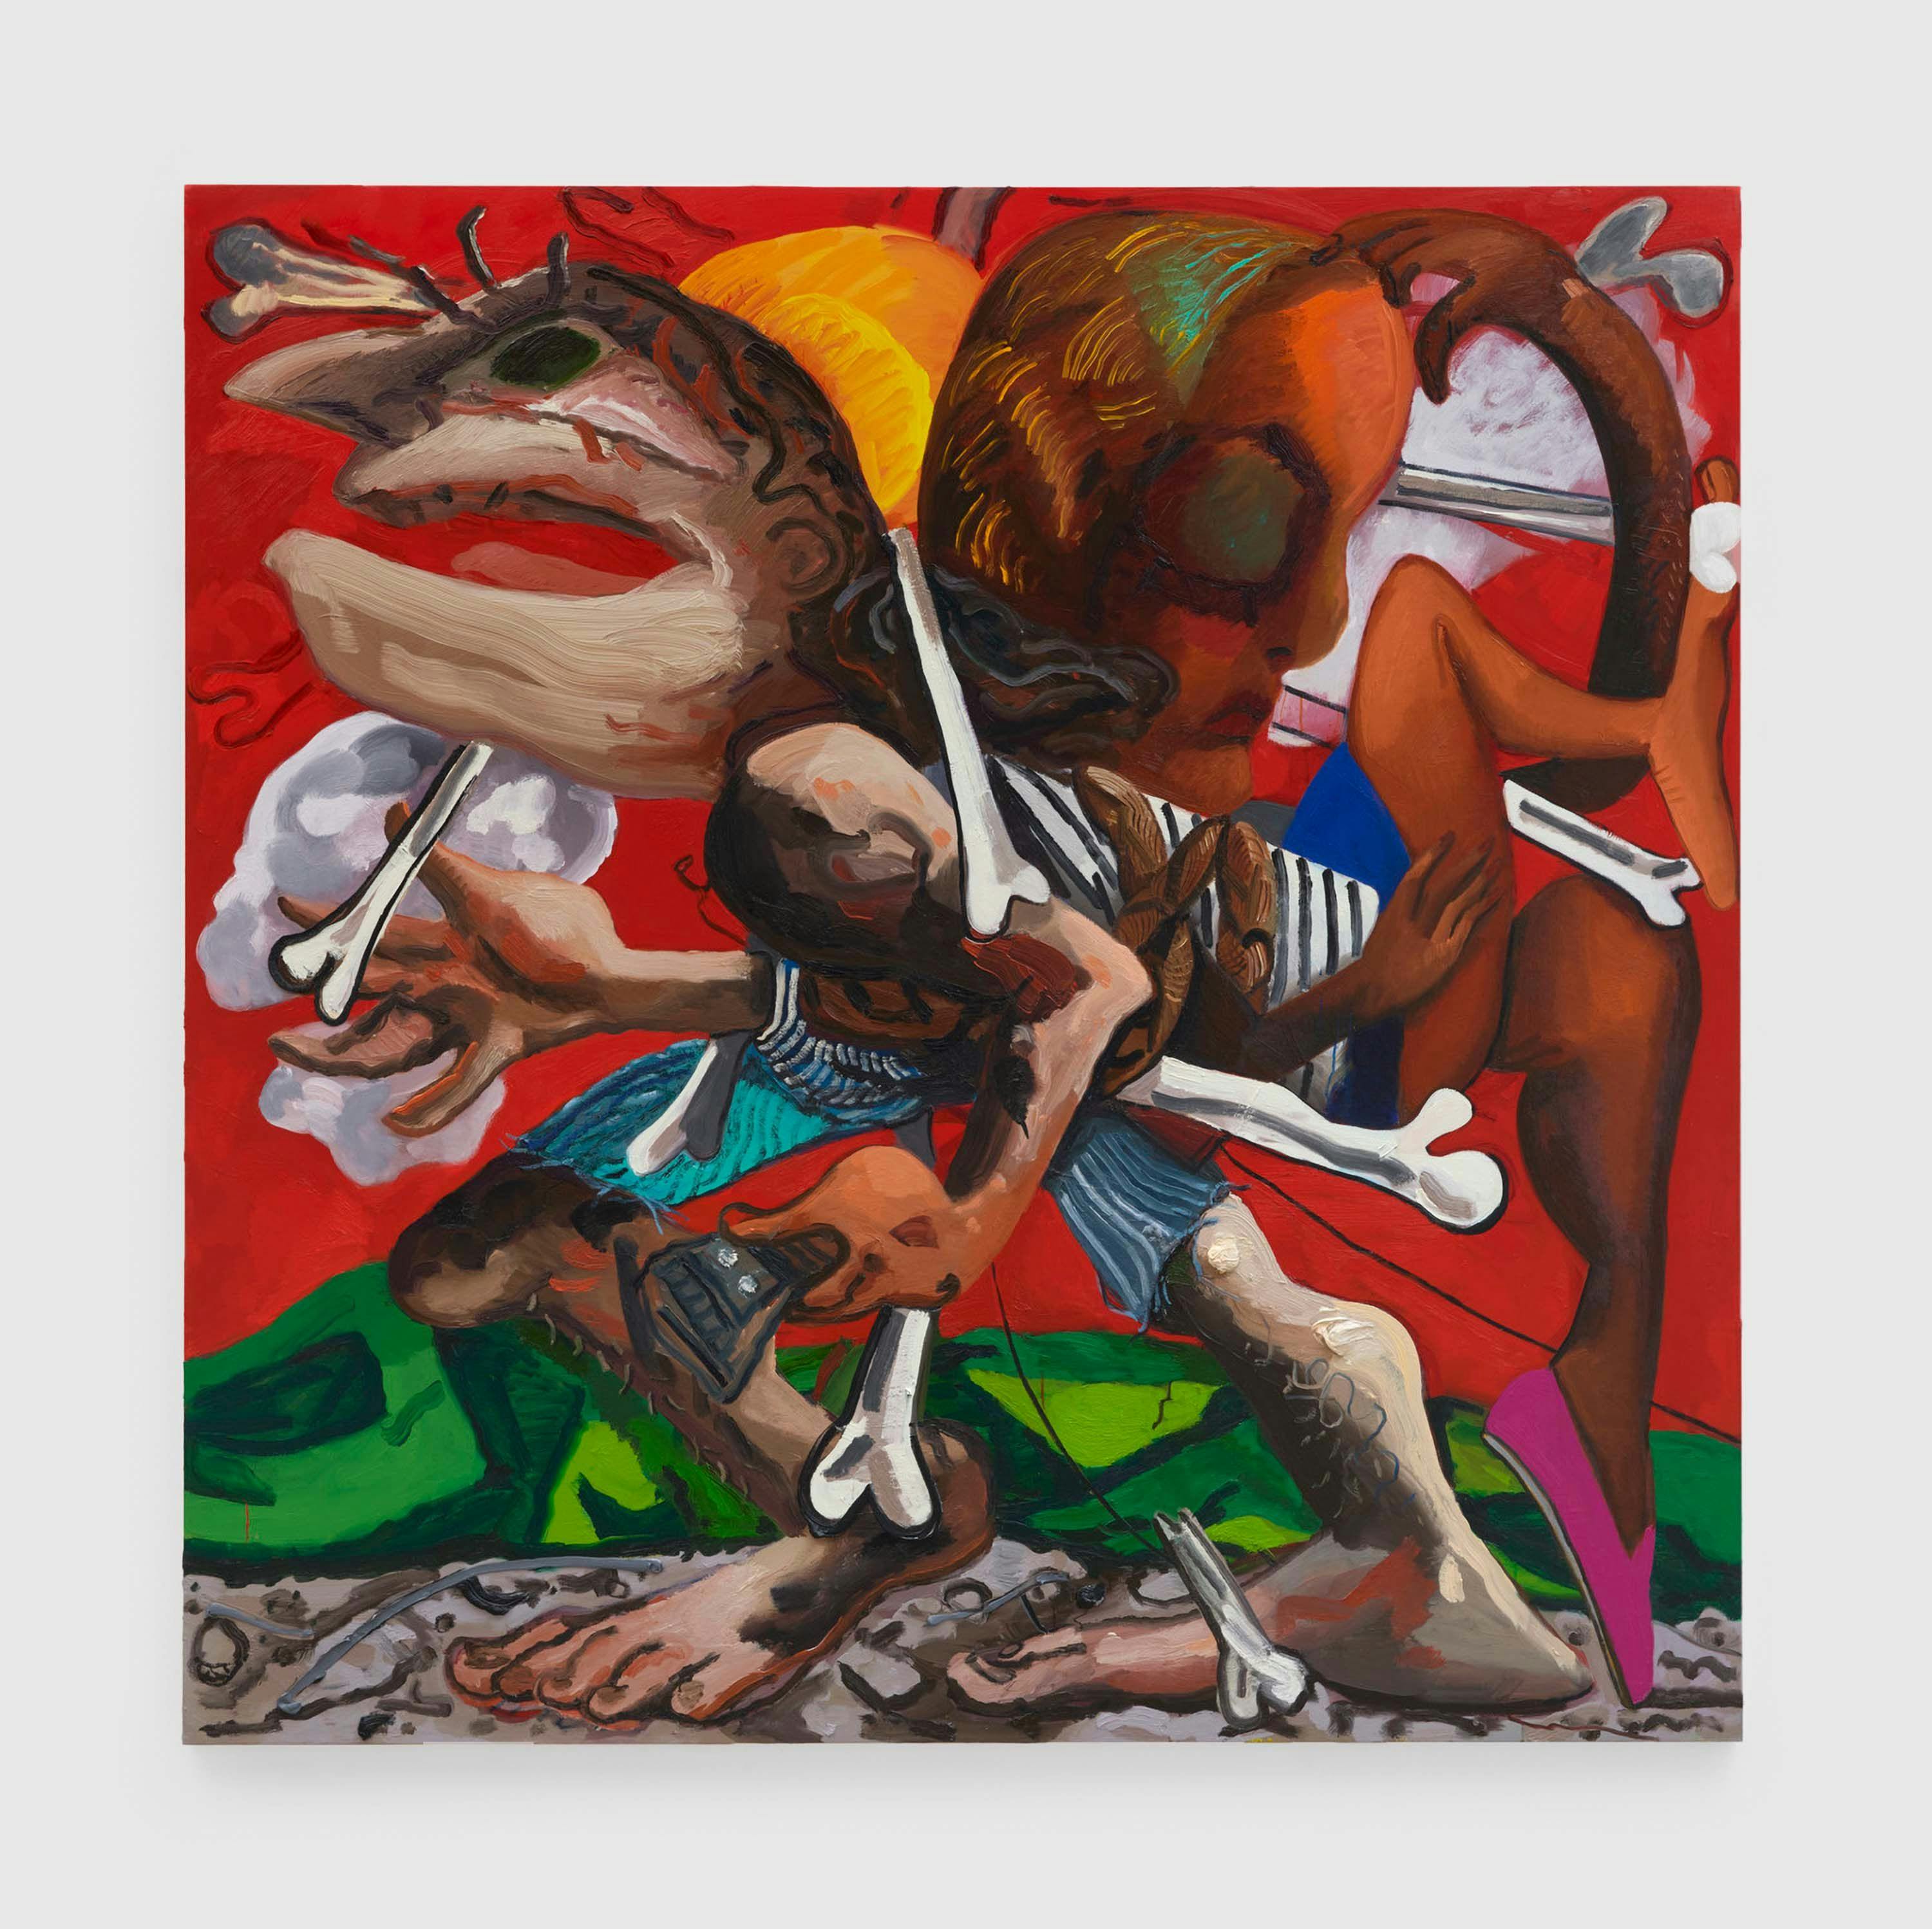 A painting by Dana Schutz, titled Bound, dated 2019.